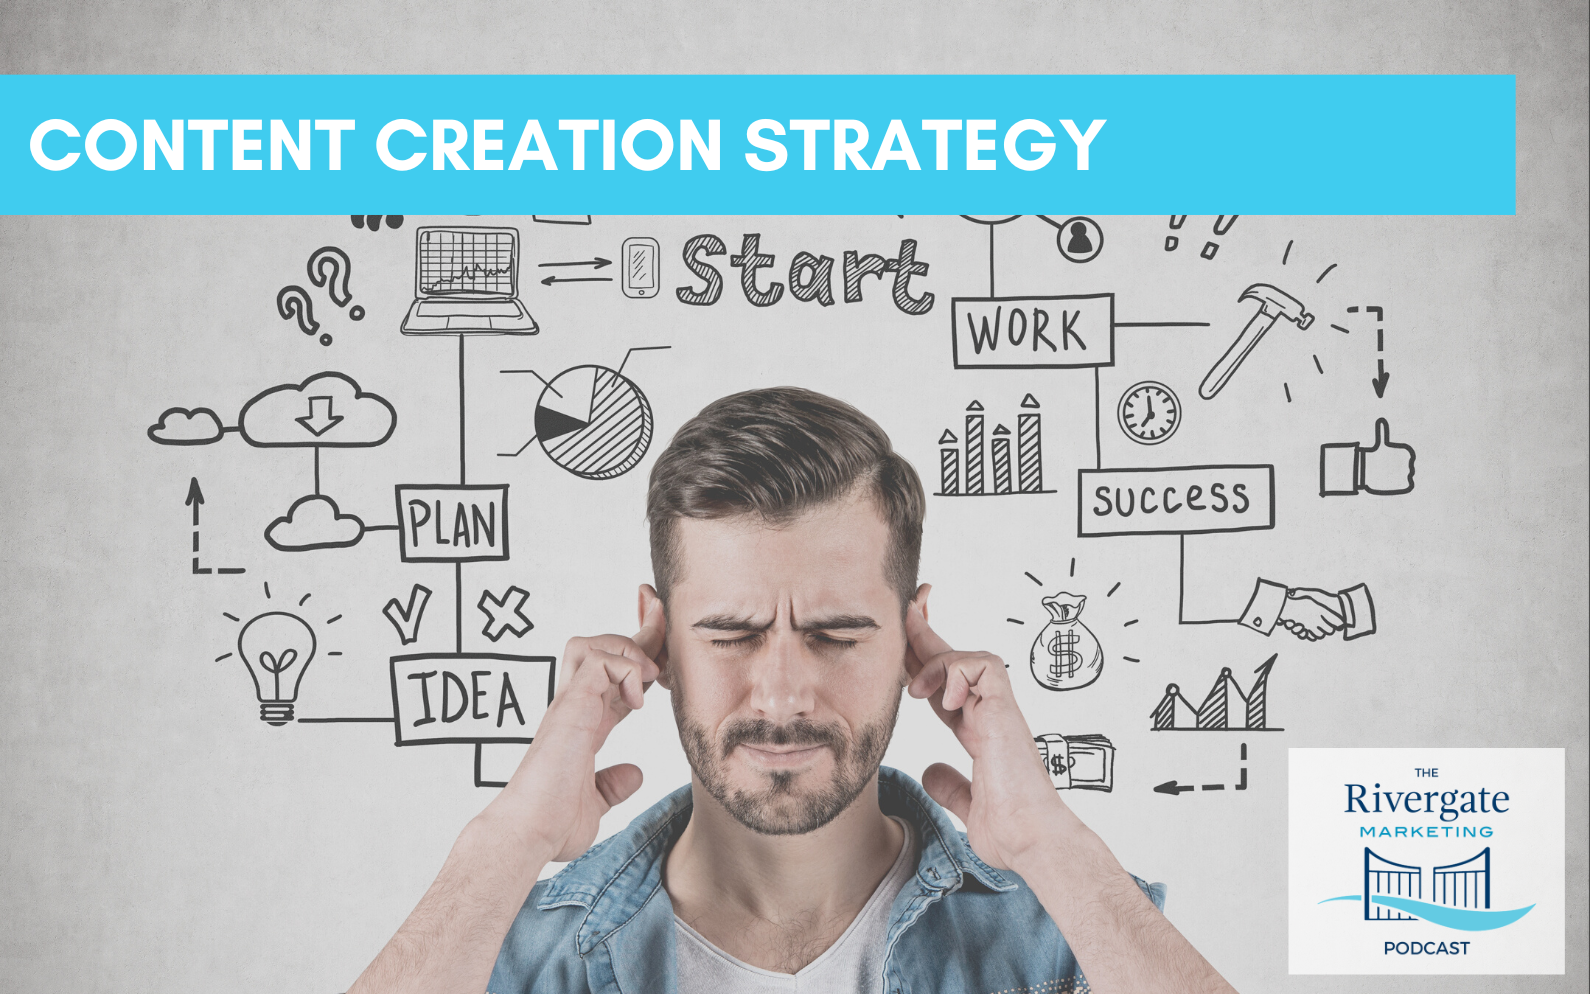 Rivergate Marketing Content Creation Strategy.